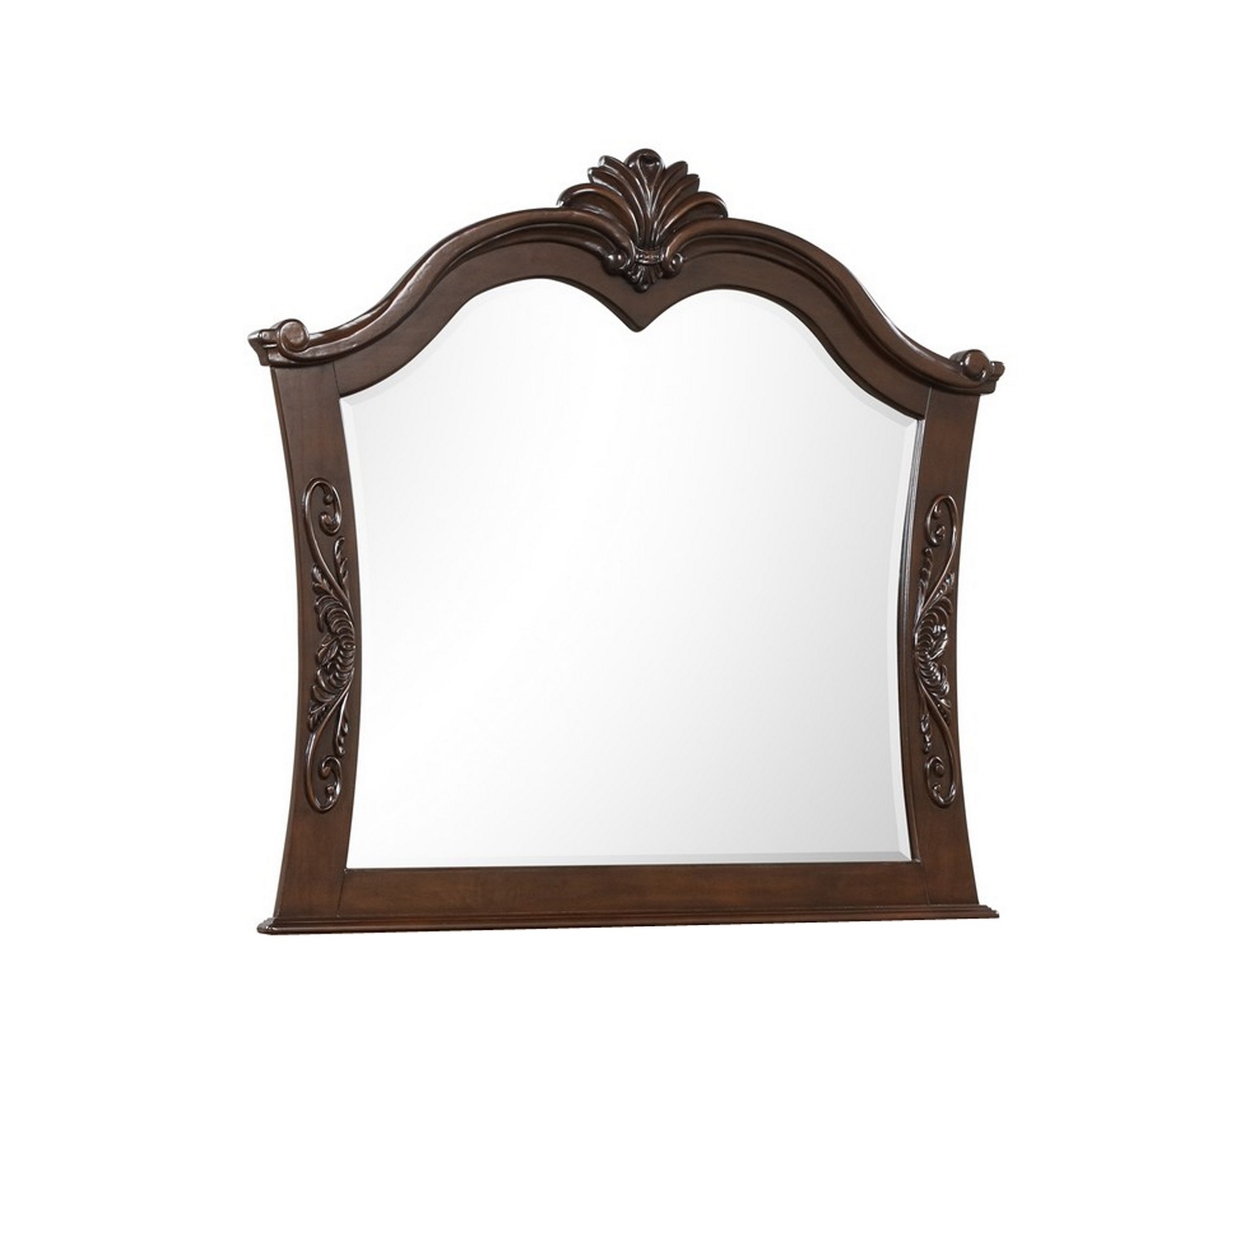 Akil 43 X 46 Dresser Mirror, Classic Arched Edges, Floral Carved Cherry Brown -Saltoro Sherpi